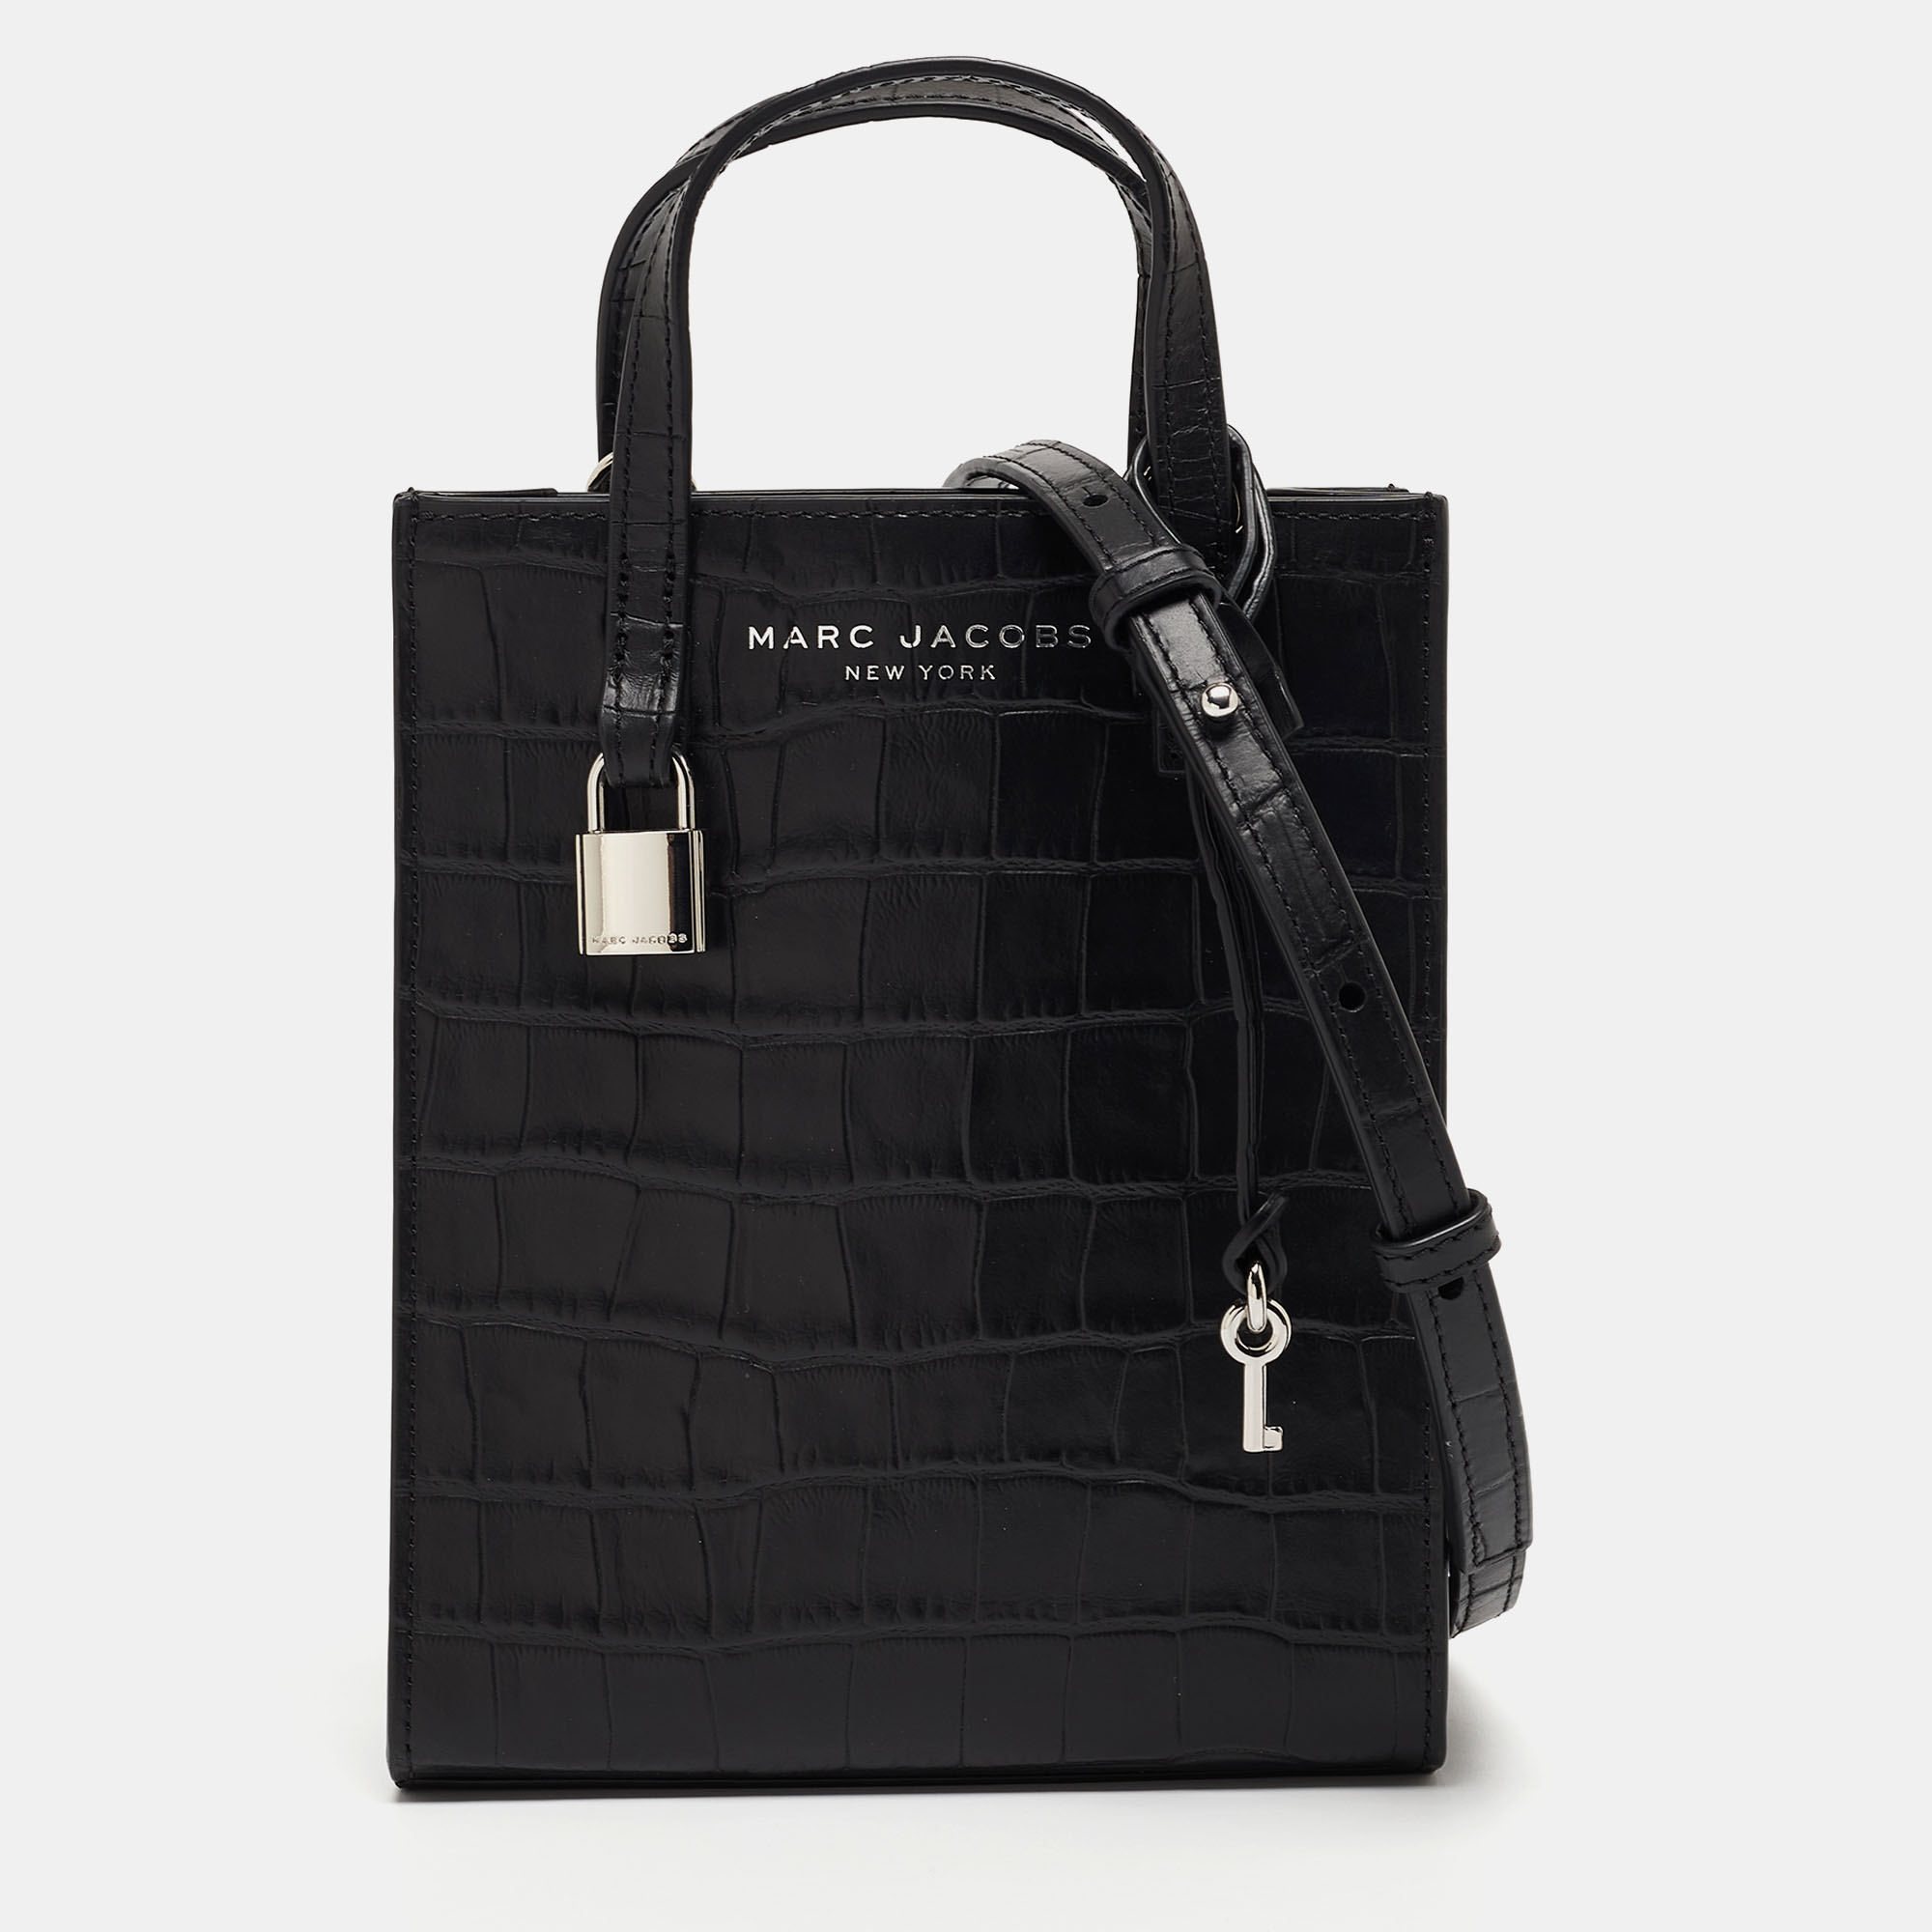 Pre-owned Marc Jacobs Black Croc Embossed Leather Micro Tote